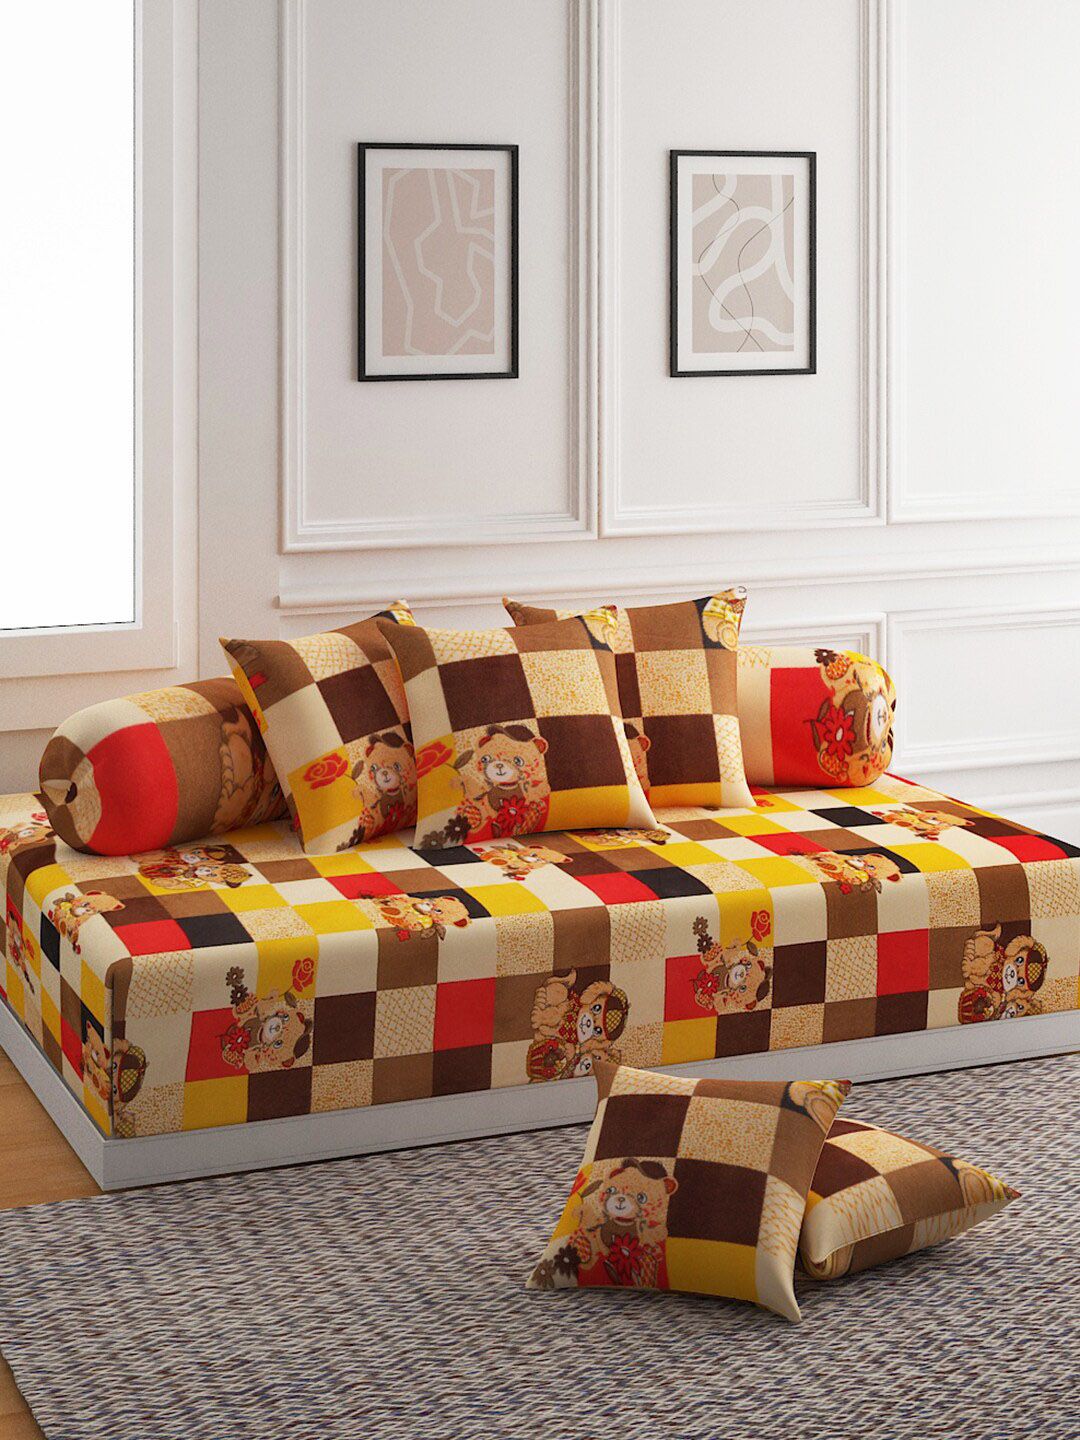 ROMEE Beige & Yellow Floral Teddy Printed Single Bedsheet With 2 Bolster Covers & 5 Cushion Covers Diwan Set Price in India